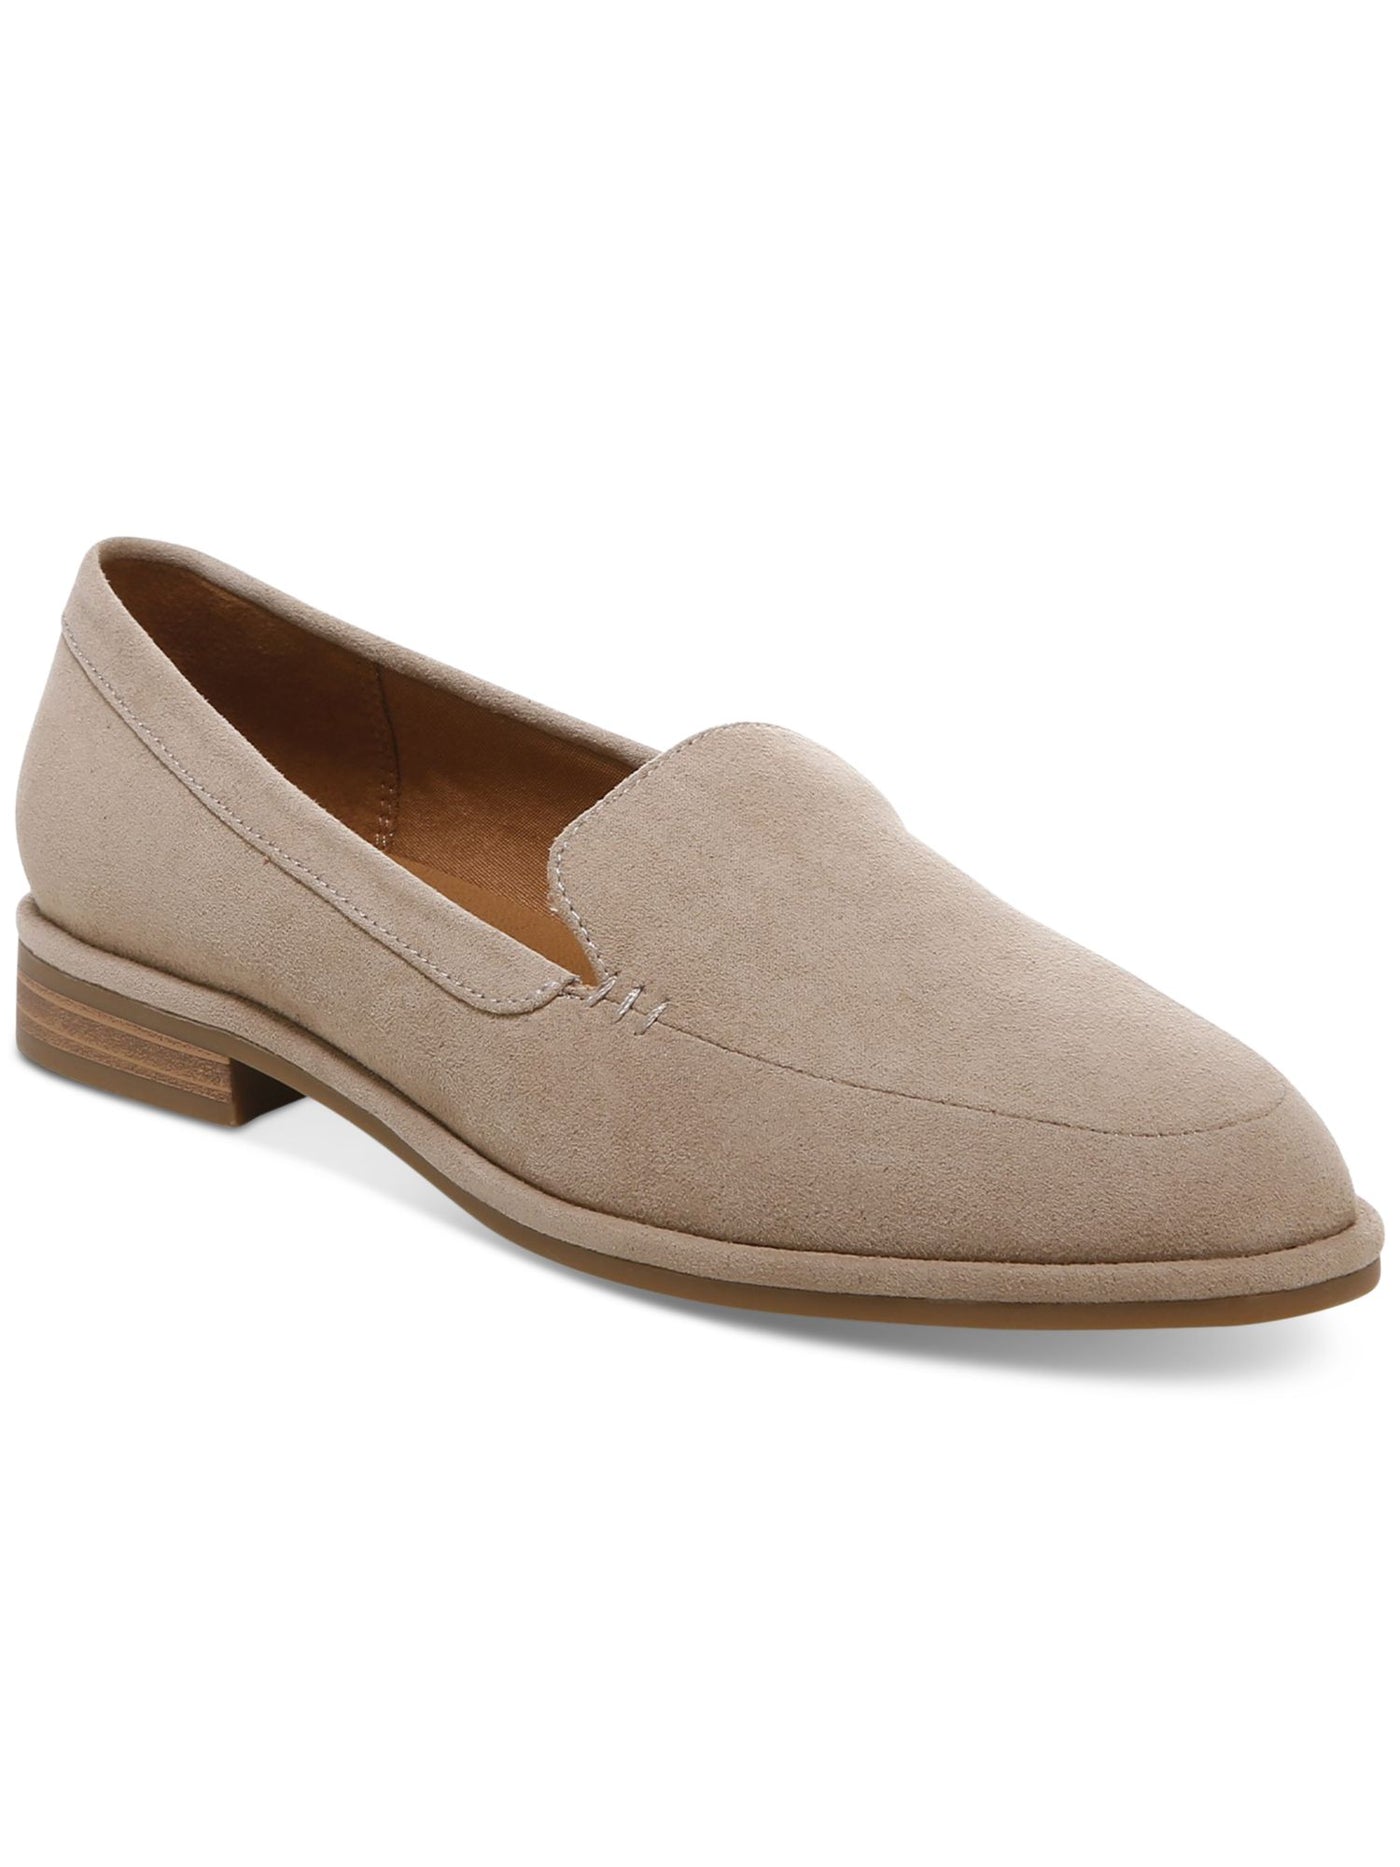 STYLE & COMPANY Womens Beige Padded Houstonn Almond Toe Slip On Loafers Shoes 7 M